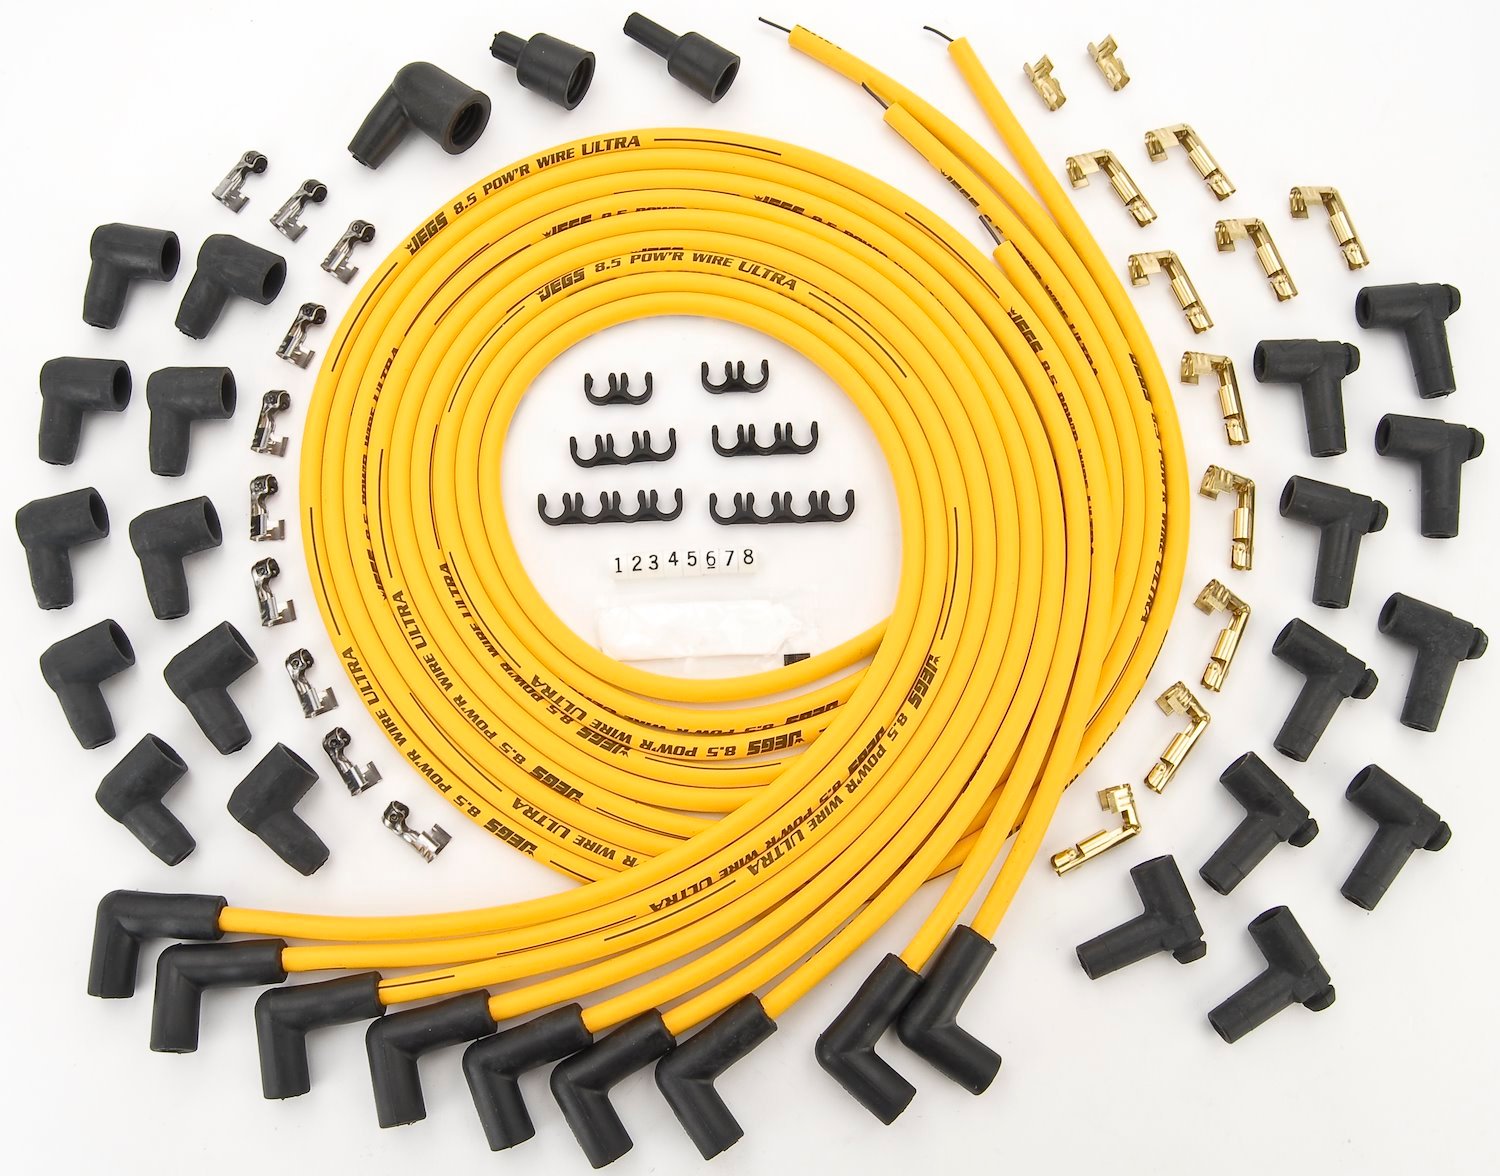 8.5mm Yellow Ultra Pow'r Wires Small & Big Block Chevy Over Valve Covers or Under Headers